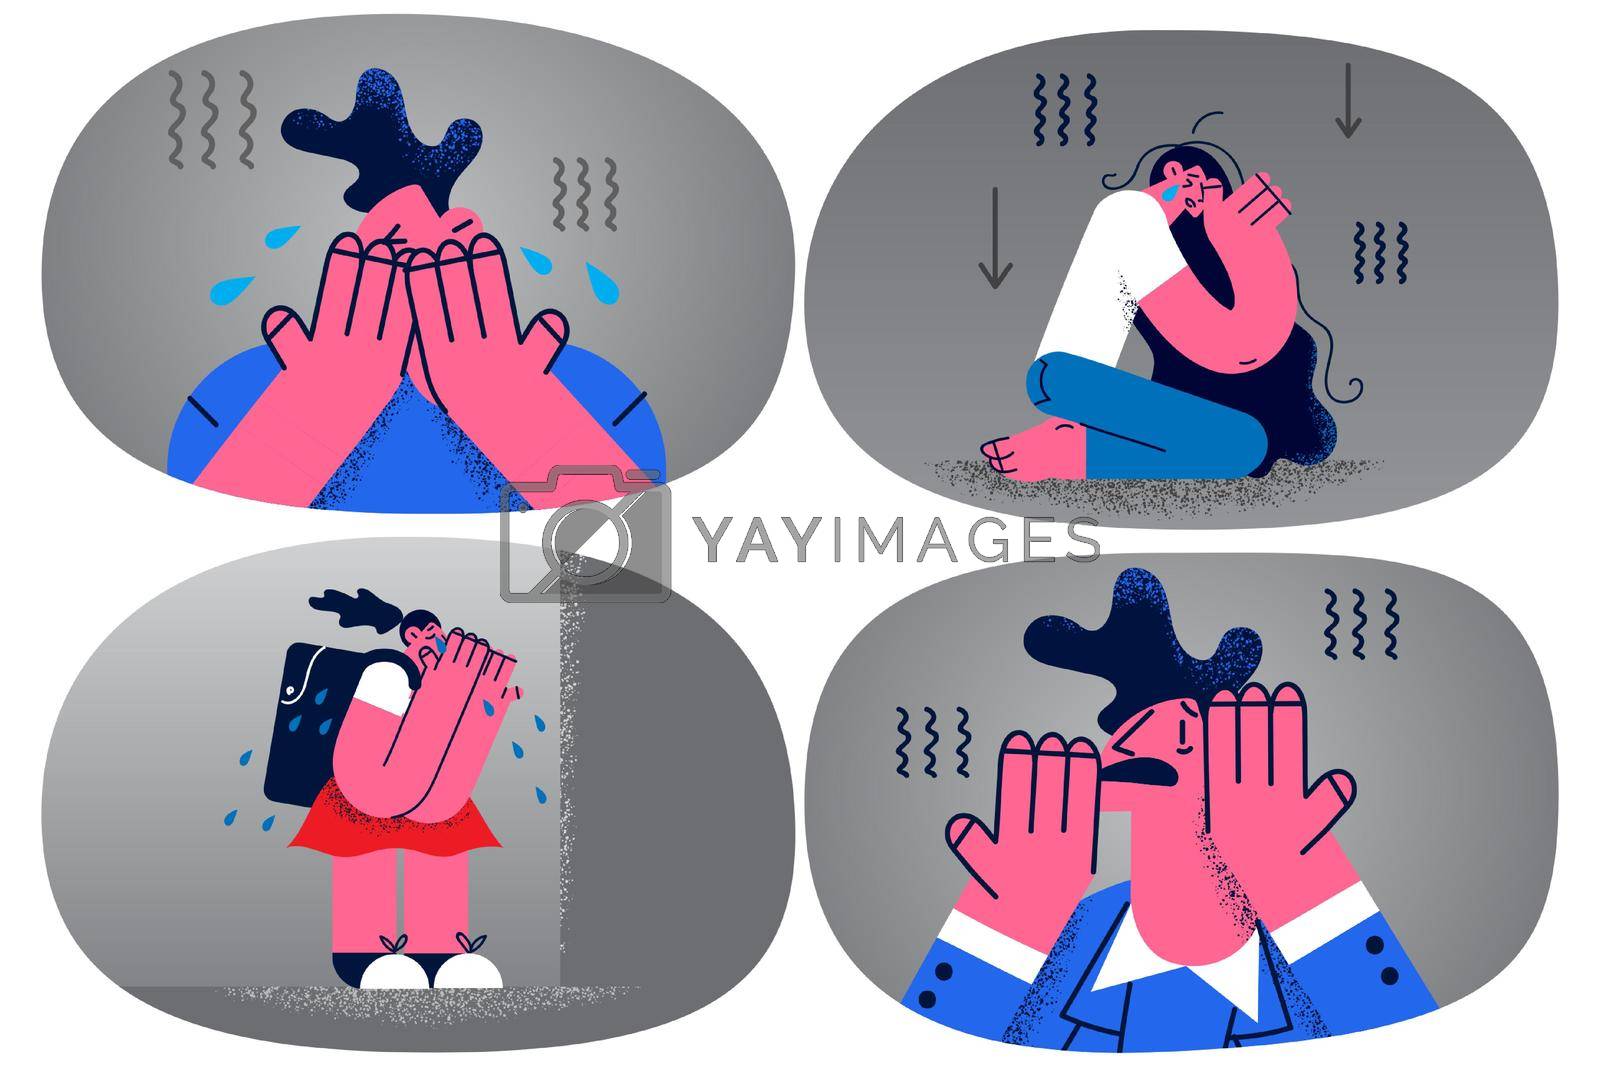 Unhappy man woman feel stressed having life problems unable to cope suffer from depression. Distressed people struggle with nervous breakdown or mental disorder. Anxiety attack. Vector illustration.